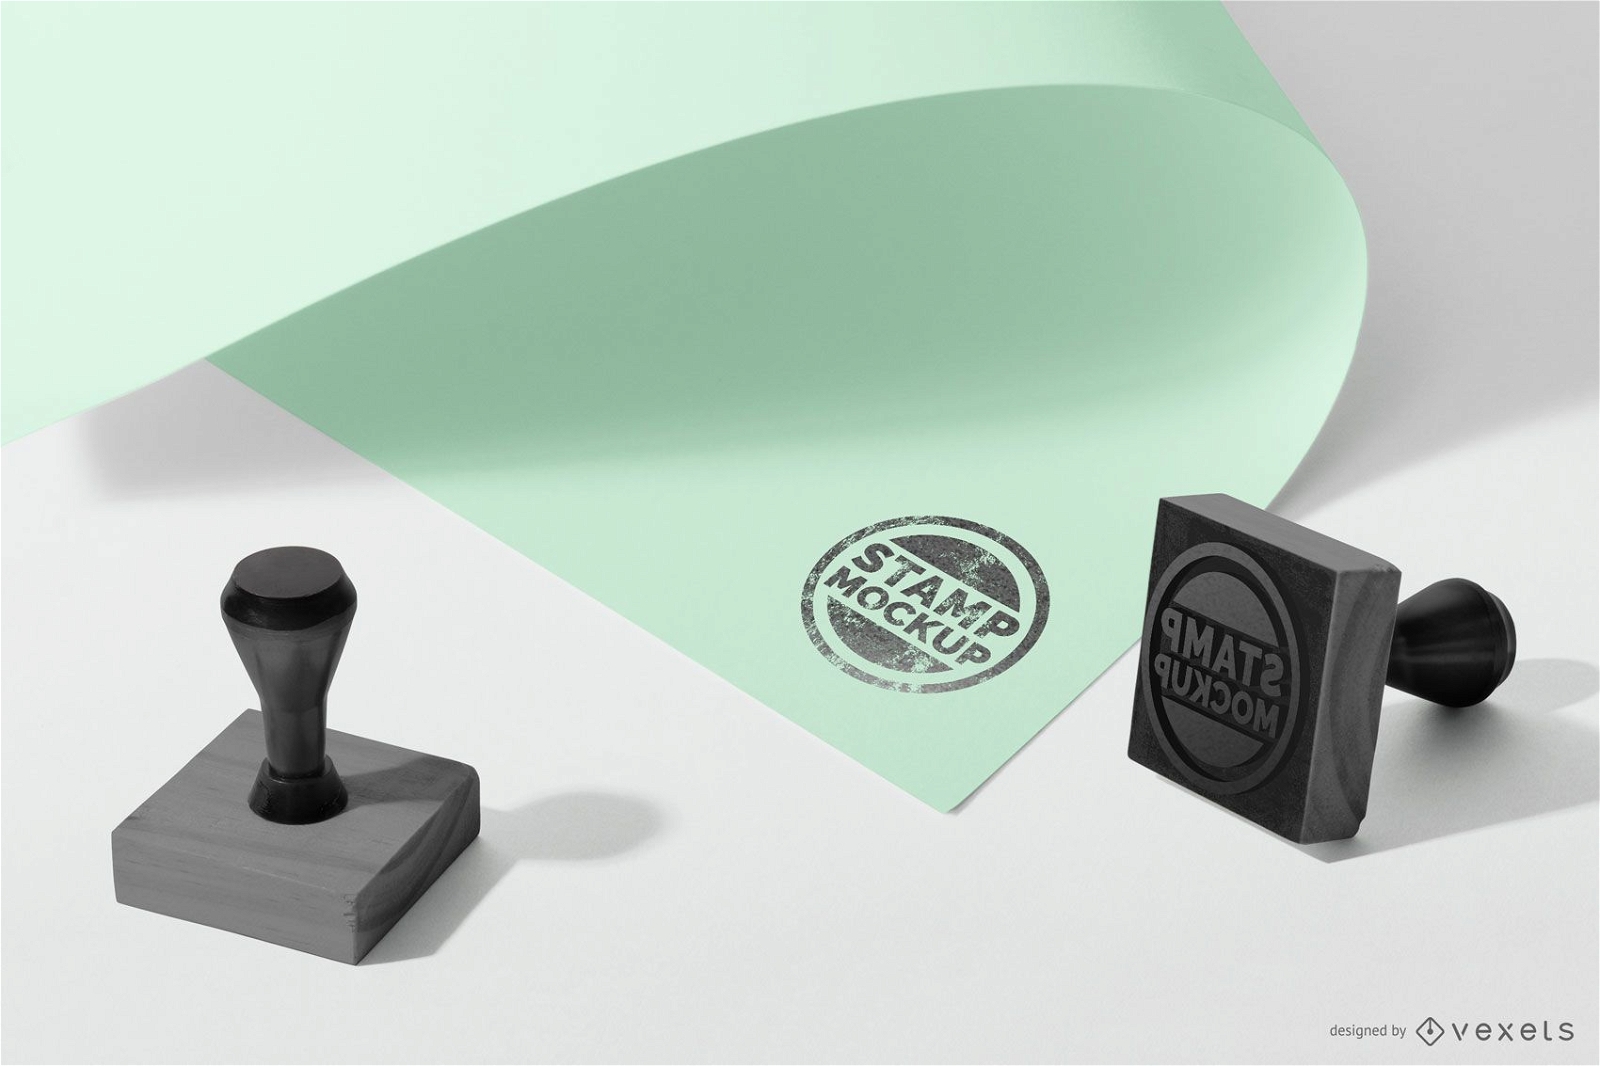 Rubber Stamp Mockup Projects :: Photos, videos, logos, illustrations and  branding :: Behance